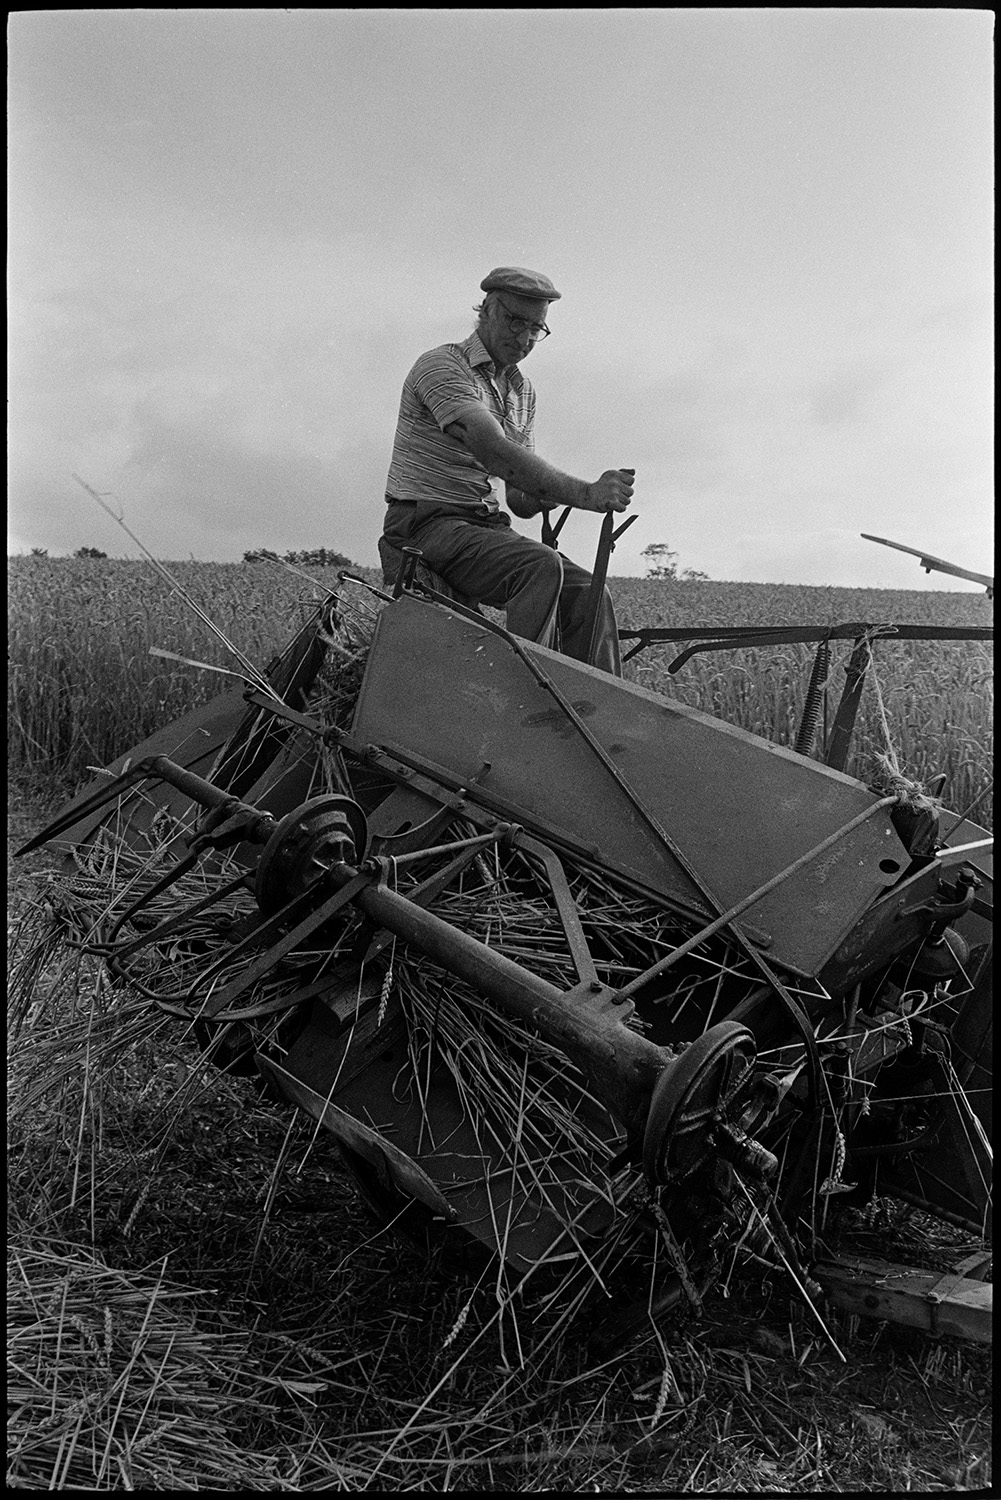 Farmers setting up stooks and unblocking reap and binder which had jammed. 
[A  man, possibly from the Down family, unblocking stuck reed from a reap and binder, in a field at Spittle Farm, Chulmleigh. He is sat on the machinery.]